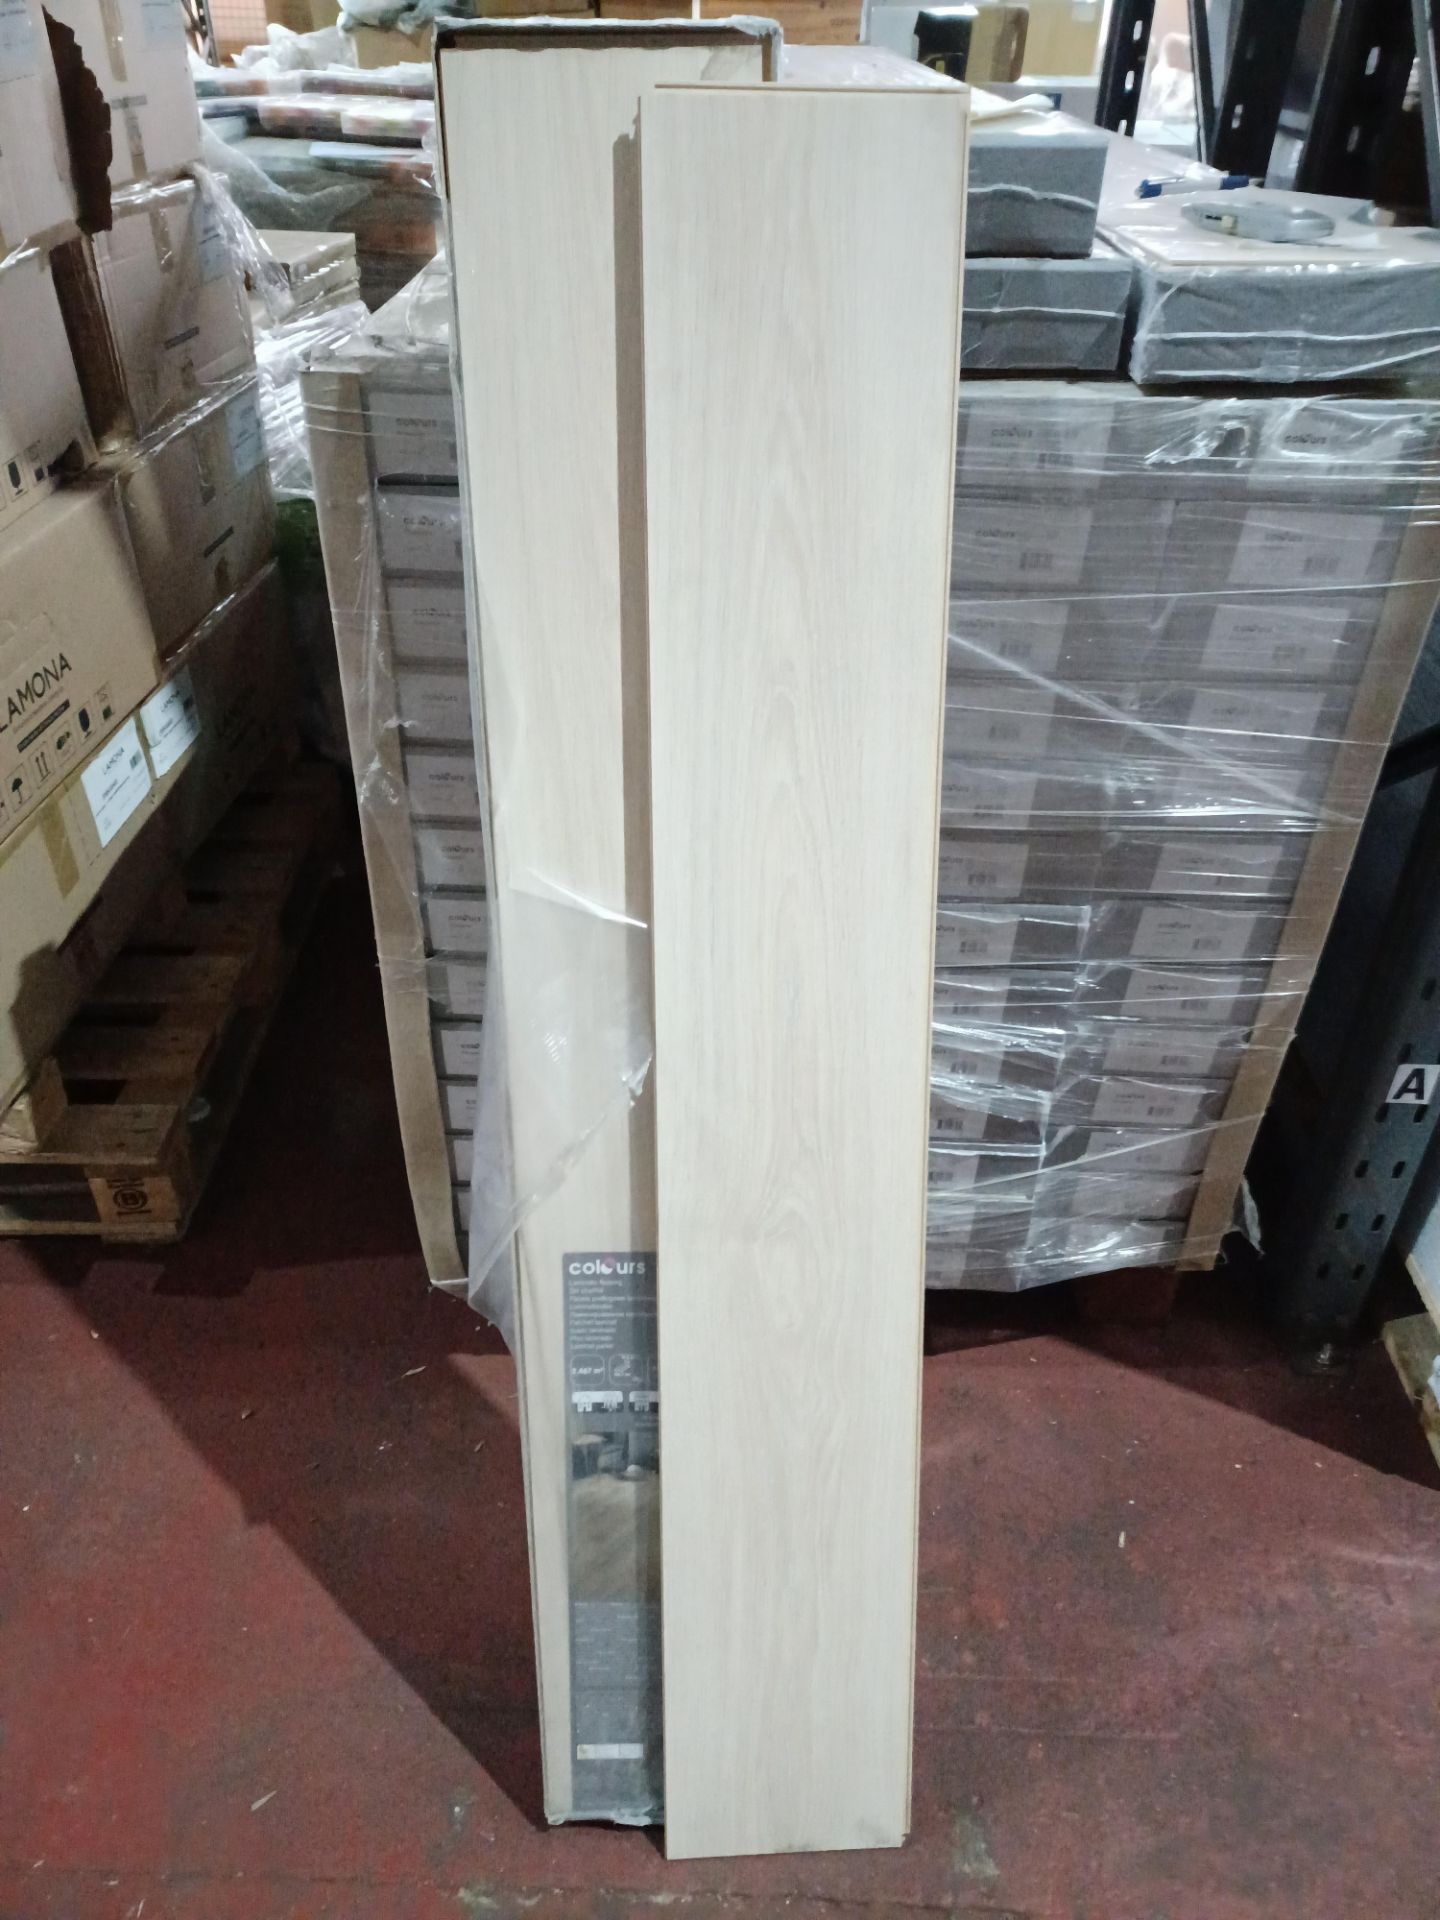 PALLET TO CONTAIN 8 X NEW SEALED PACKS OF SHEPPARTON LAMINATE FLOORING. EACH PACK CONTAINS 2.